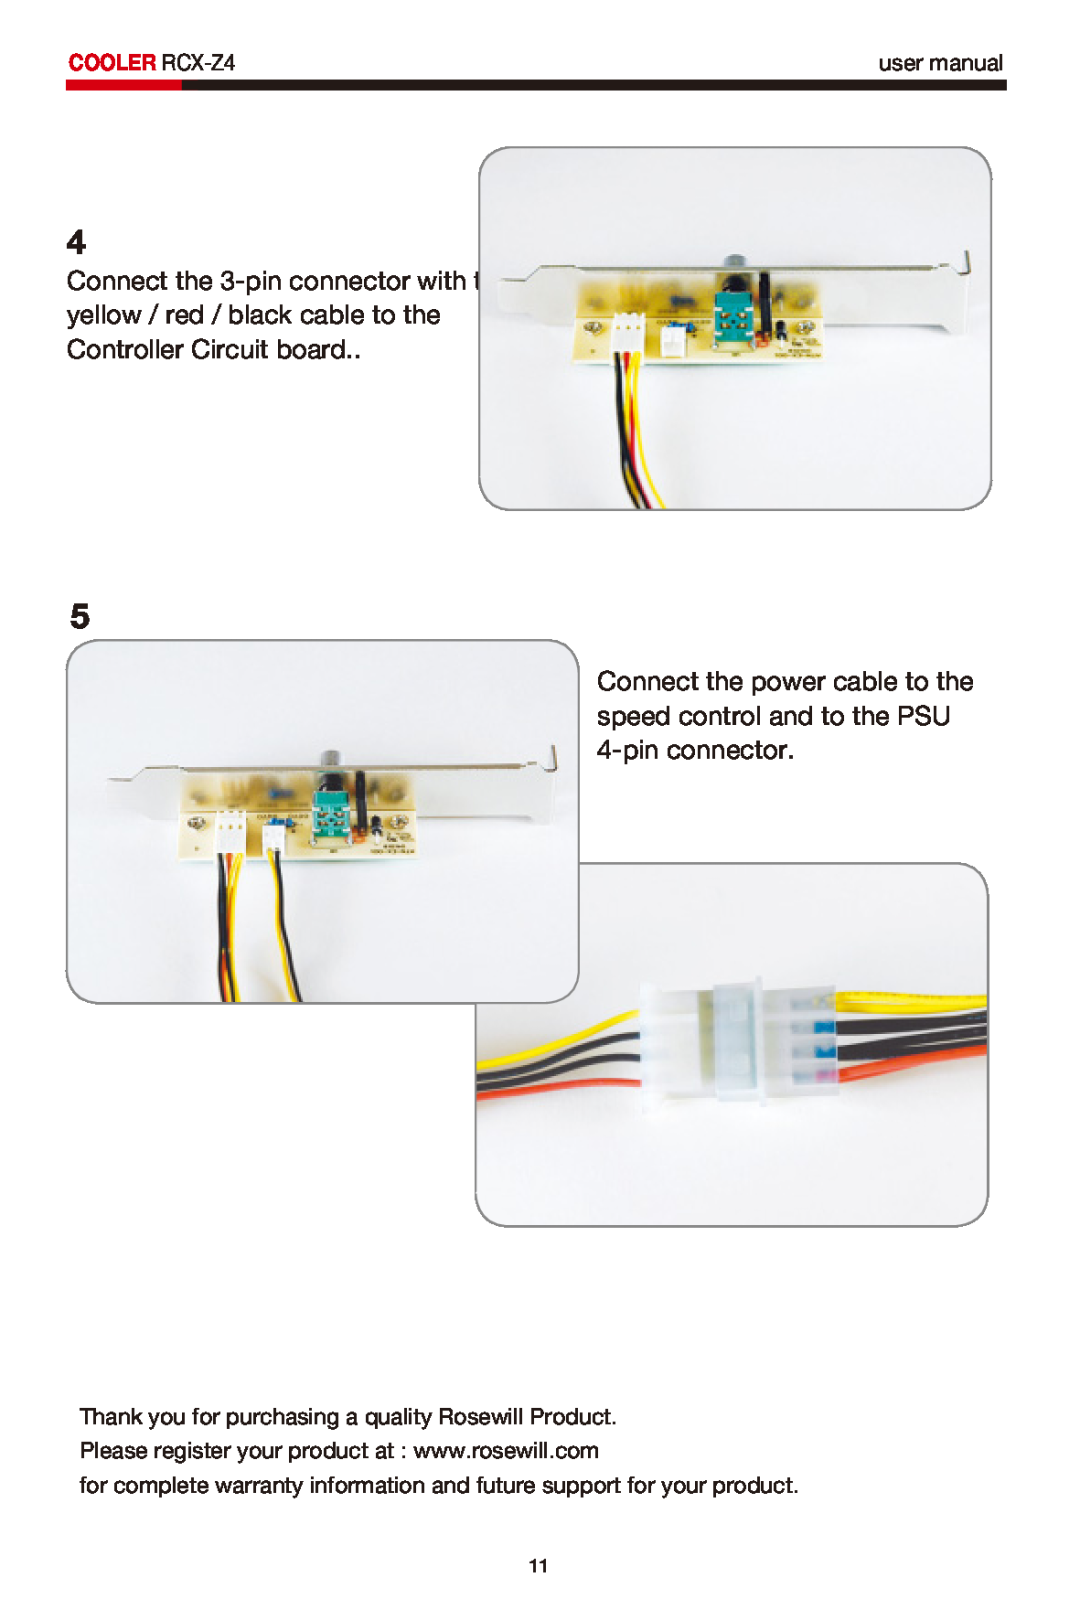 Rosewill RCX-Z4 user manual Connect the 3-pin connector with the yellow / red / black cable to the Controller Circuit board 